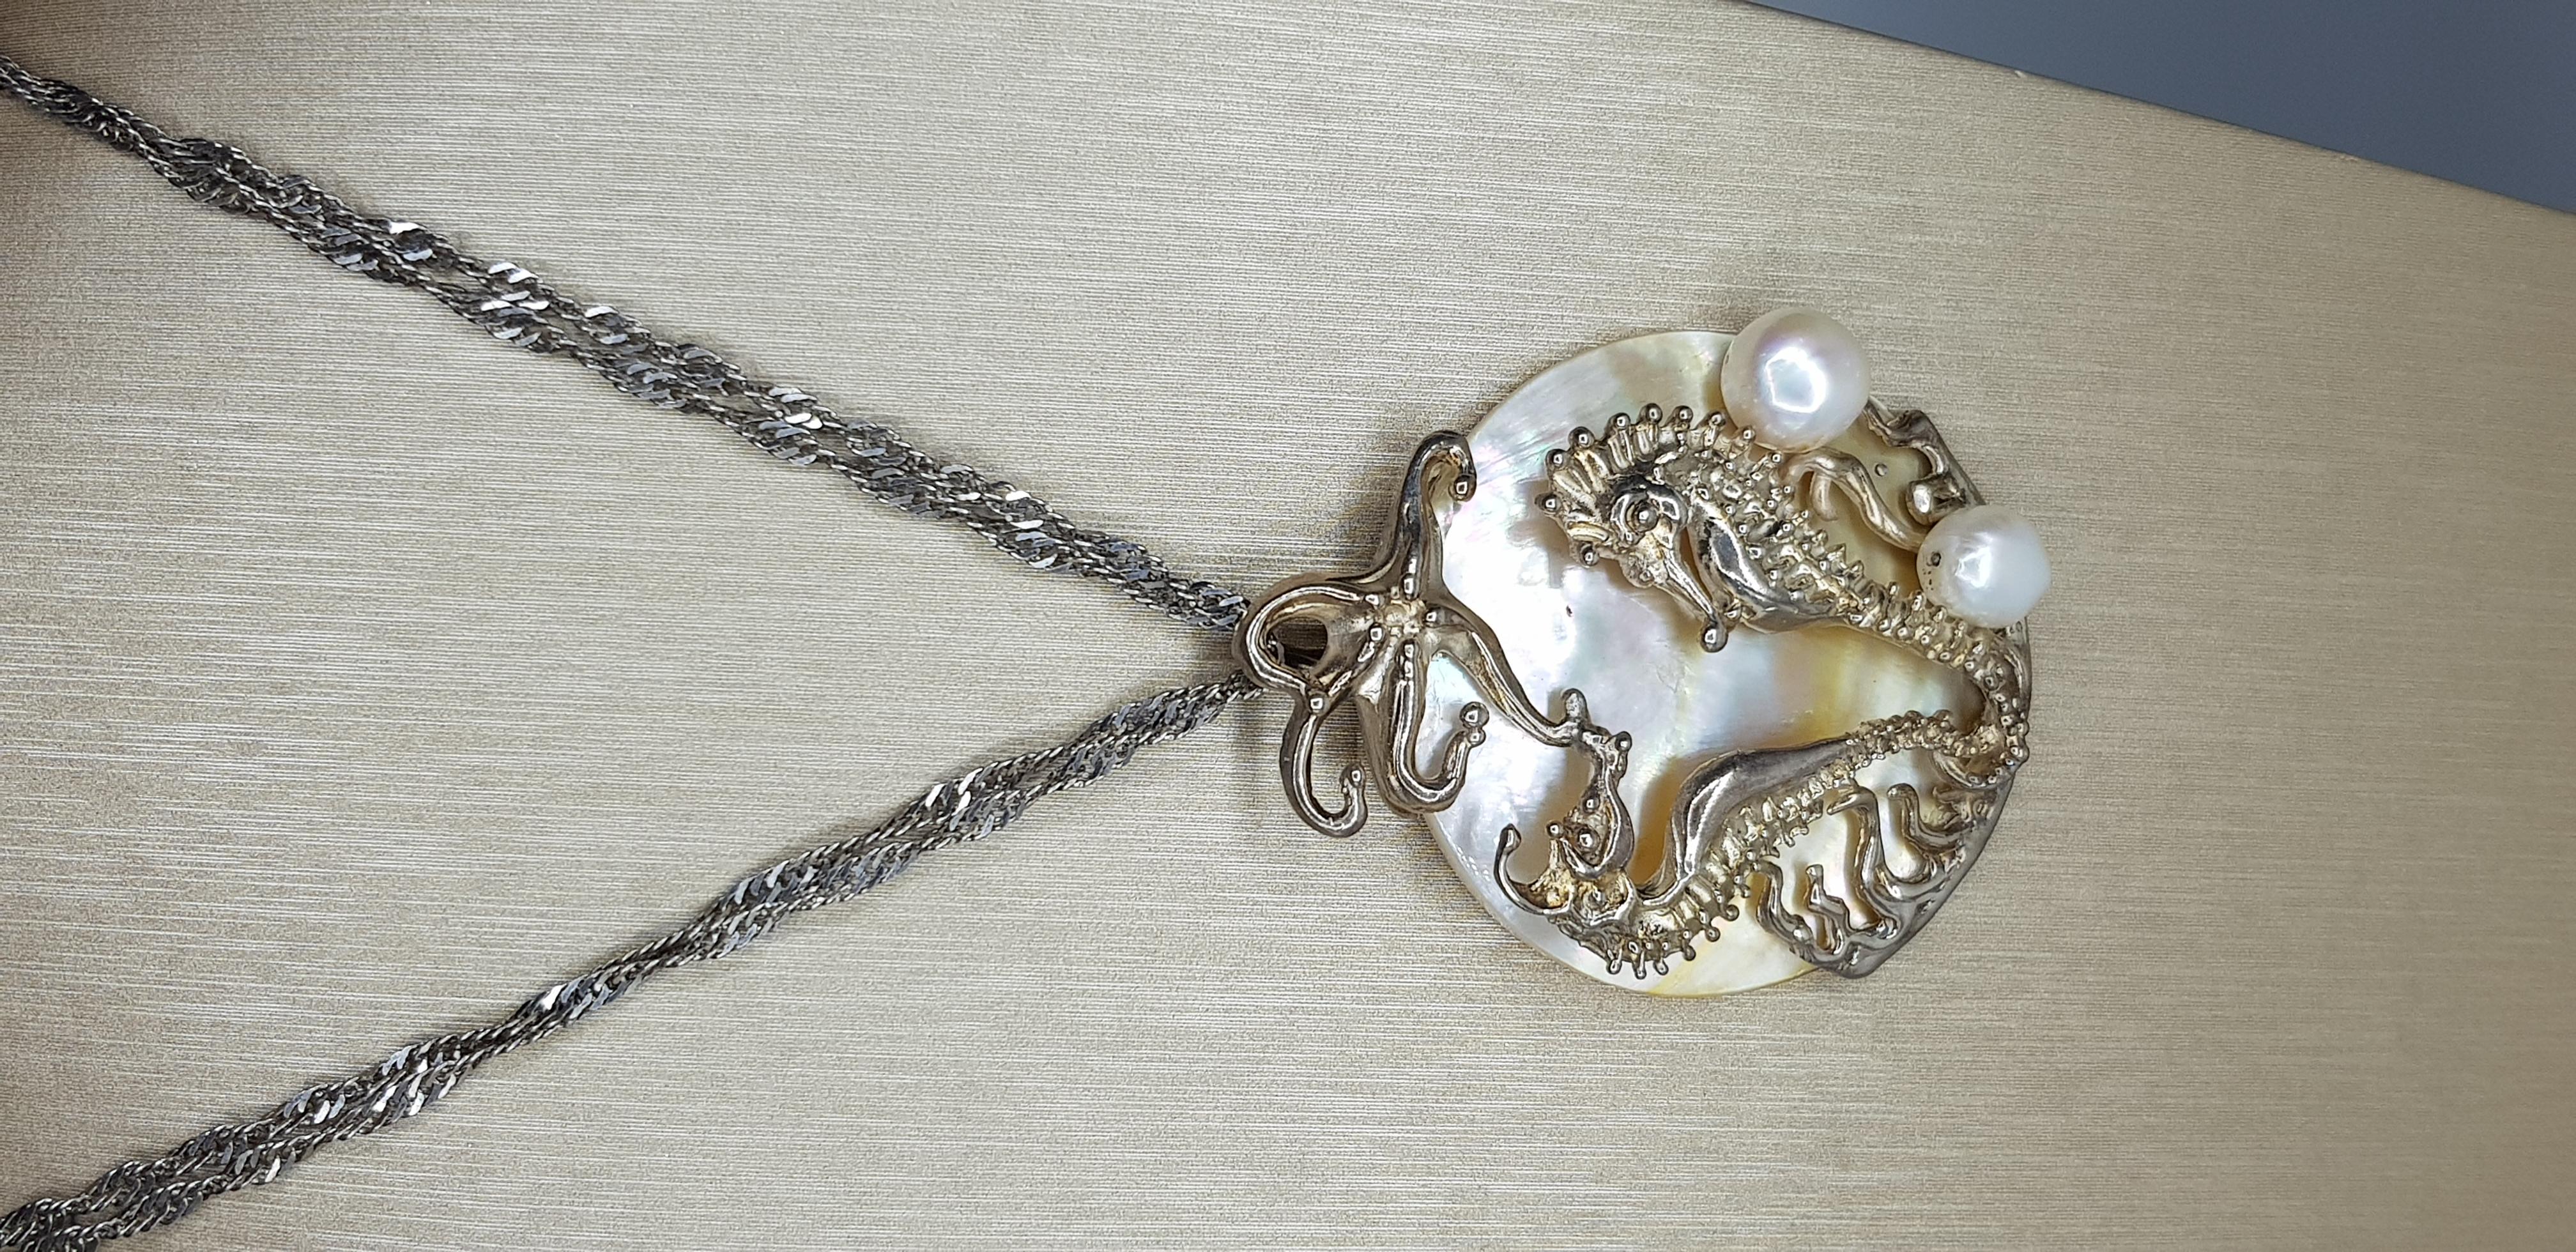 A one of a kind Sea Horse pendant necklace in sterling silver, attached to a mother of pearl disc with two fresh water pearls